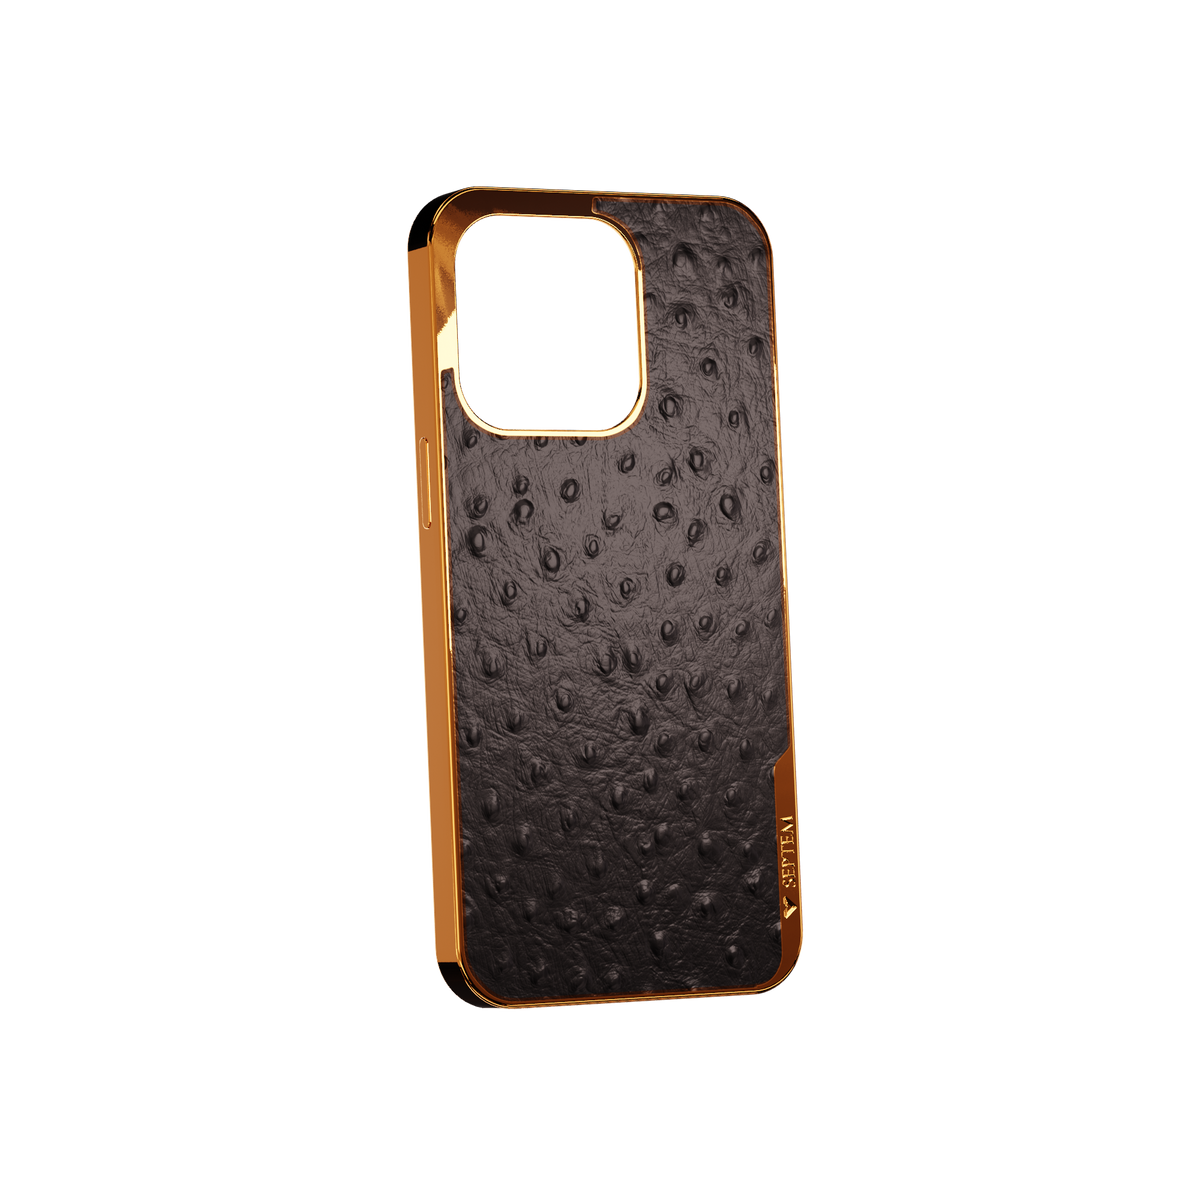 Black Gold Ostrich Back Fused Leather iPhone Case